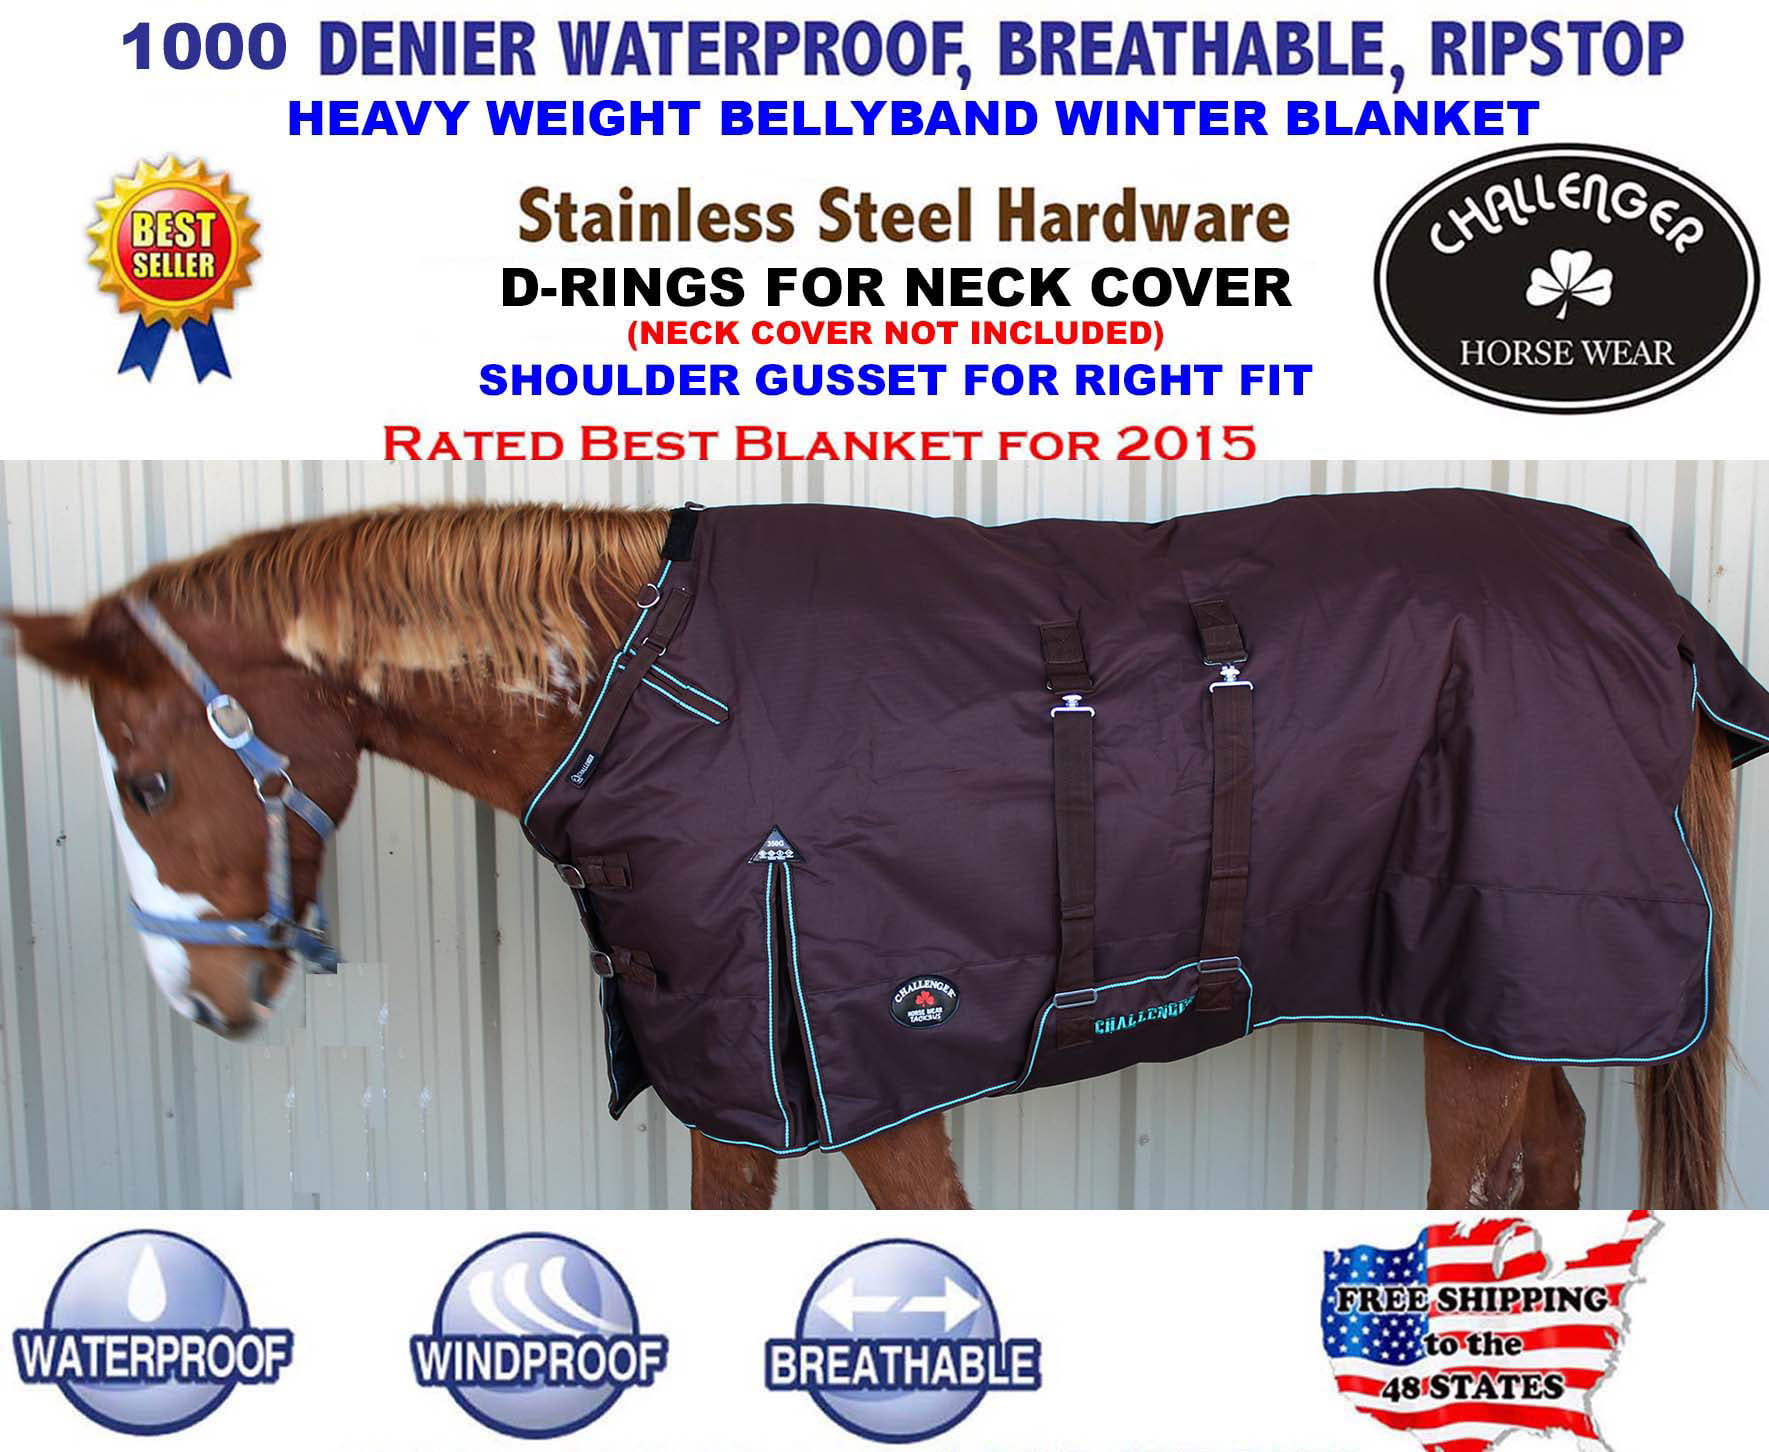 CHALLENGER 74 1200D Turnout Waterproof Horse Winter Blanket Heavy Belly Band 550B